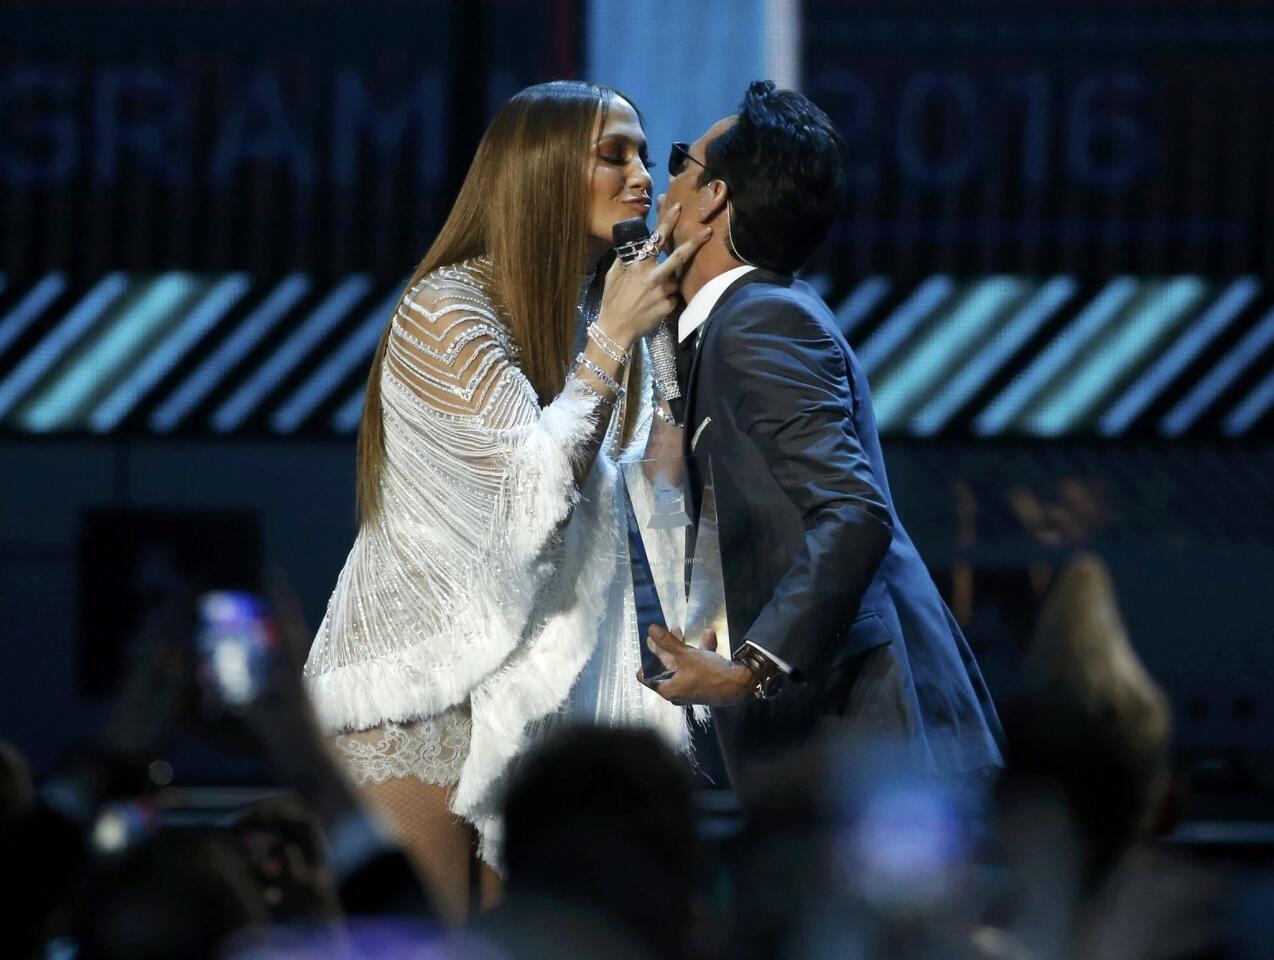 Lopez kisses Anthony after she presented him with an award honoring him as Latin Recording Academy person of the year at the 17th Annual Latin Grammy Awards in Las Vegas